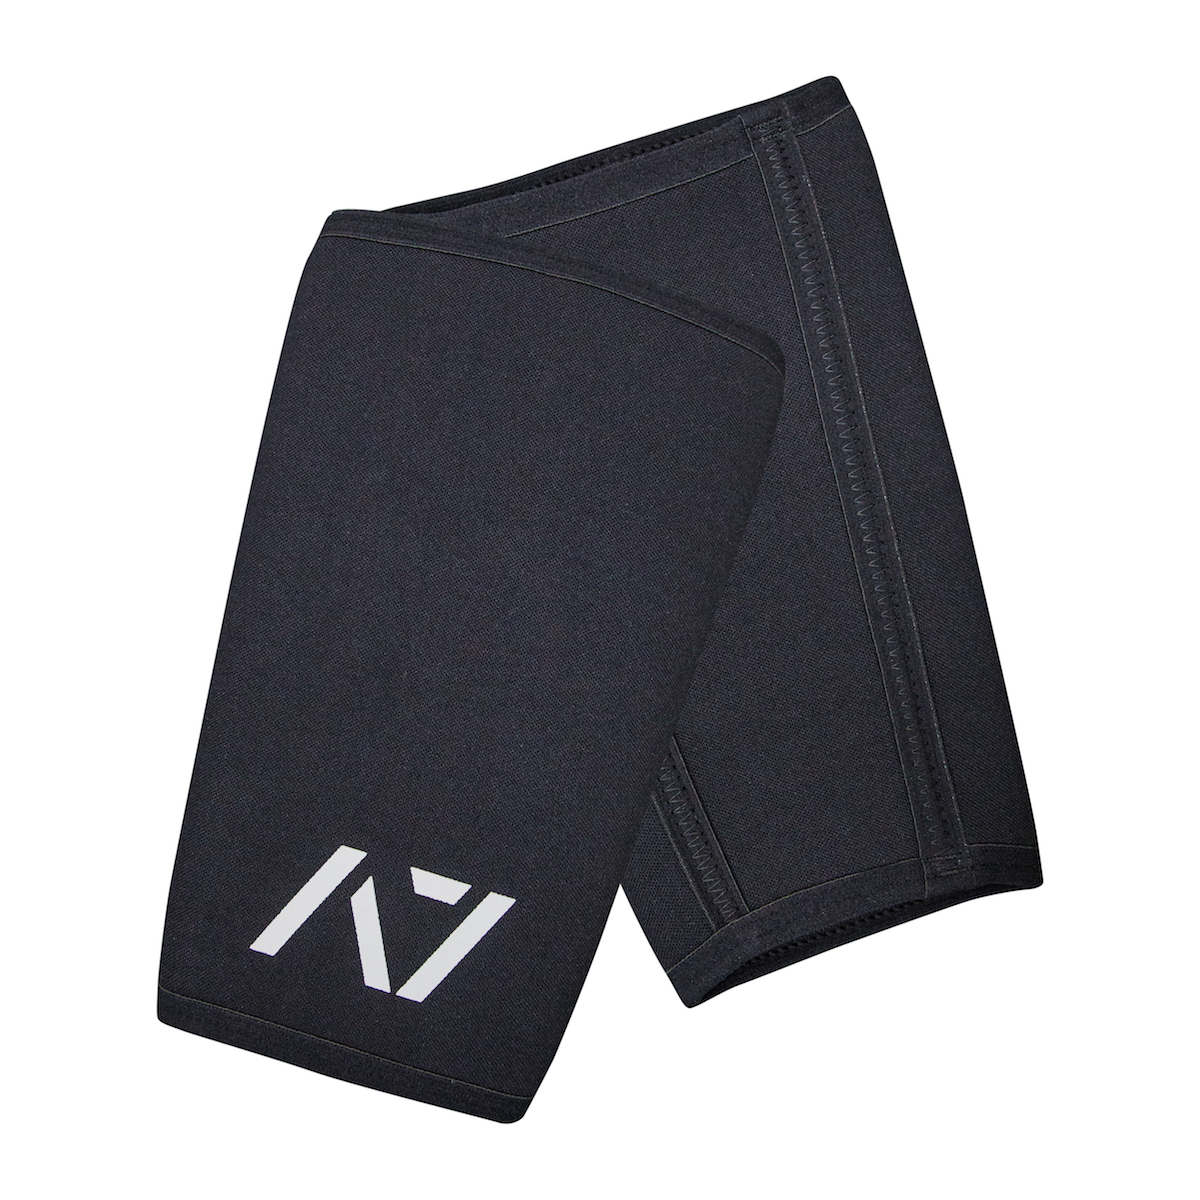   A7 IPF approved Black CONE knee sleeves are structured with a downward cut panel on the back of the quad and calf to ensure ultimate compression at the knee joint. A7 CONE knee sleeves are IPF approved for use in all powerlifting competitions. A7 cone knee sleeves are made with high quality neoprene and the knee sleeves are sold as a pair. The double seem on the knee sleeves create a greater tension on the knee joint. Available in UK and Europe including France, Italy, Germany, Sweden and Poland